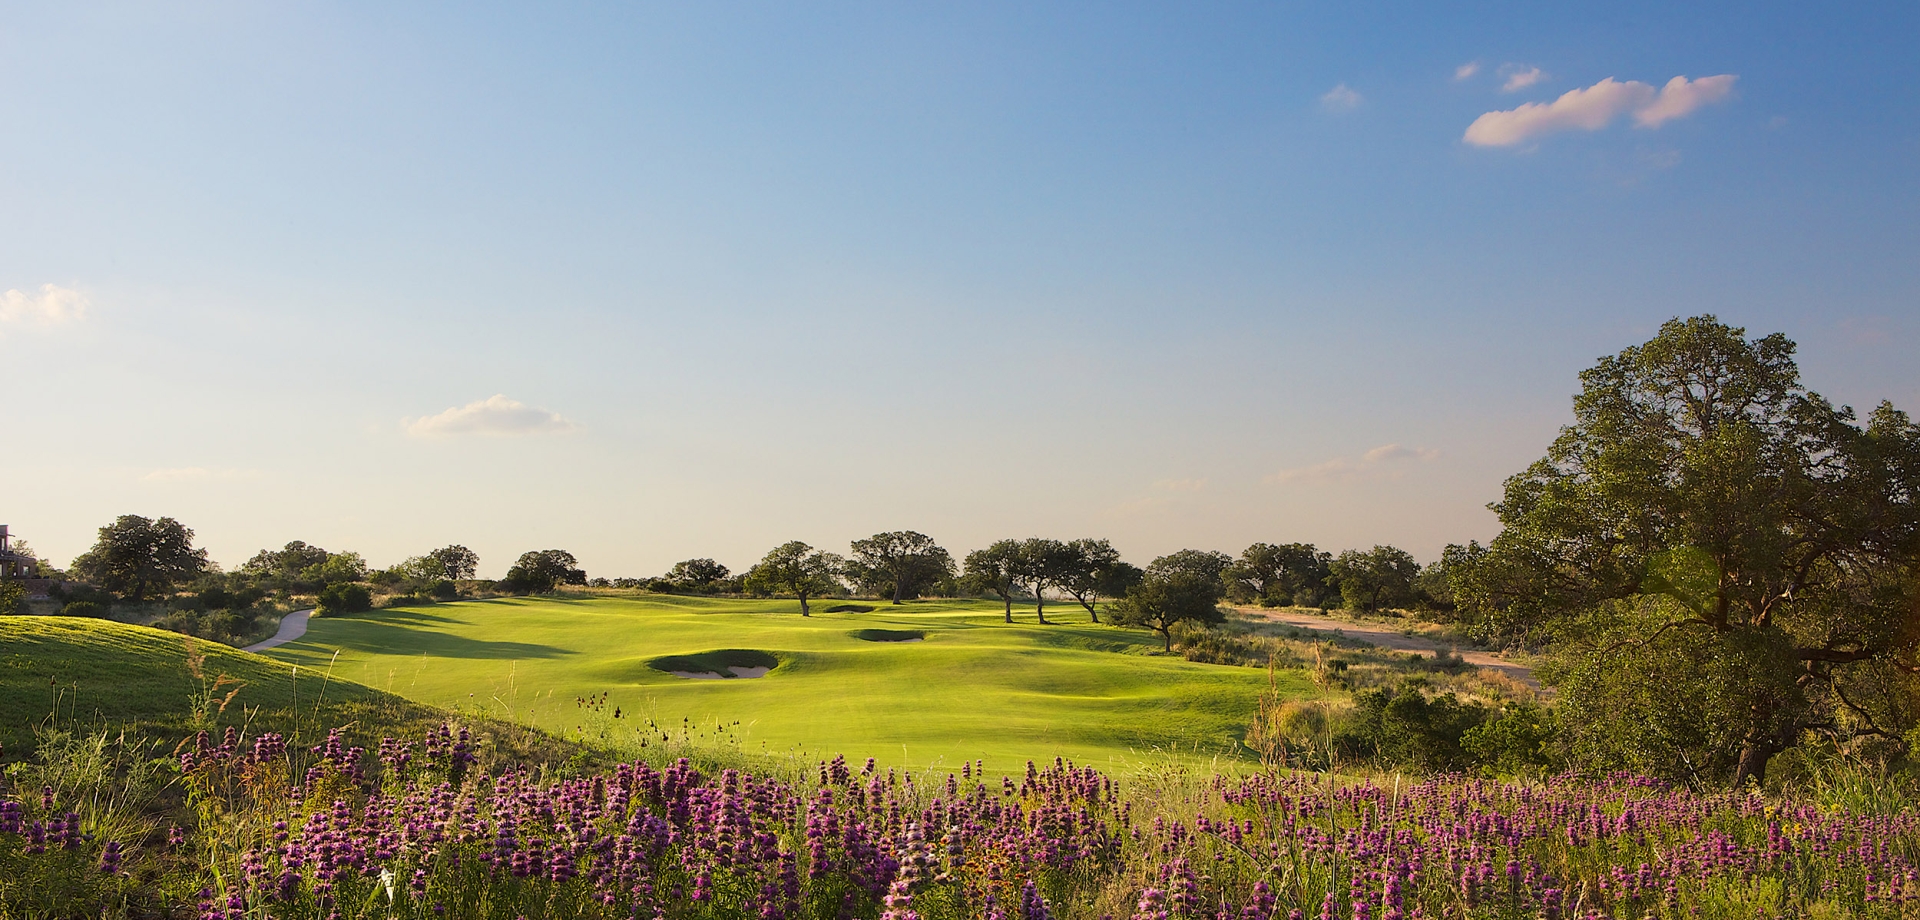 Beautiful purple flowers in the foreground over looking the fairway of one of our golf courses.